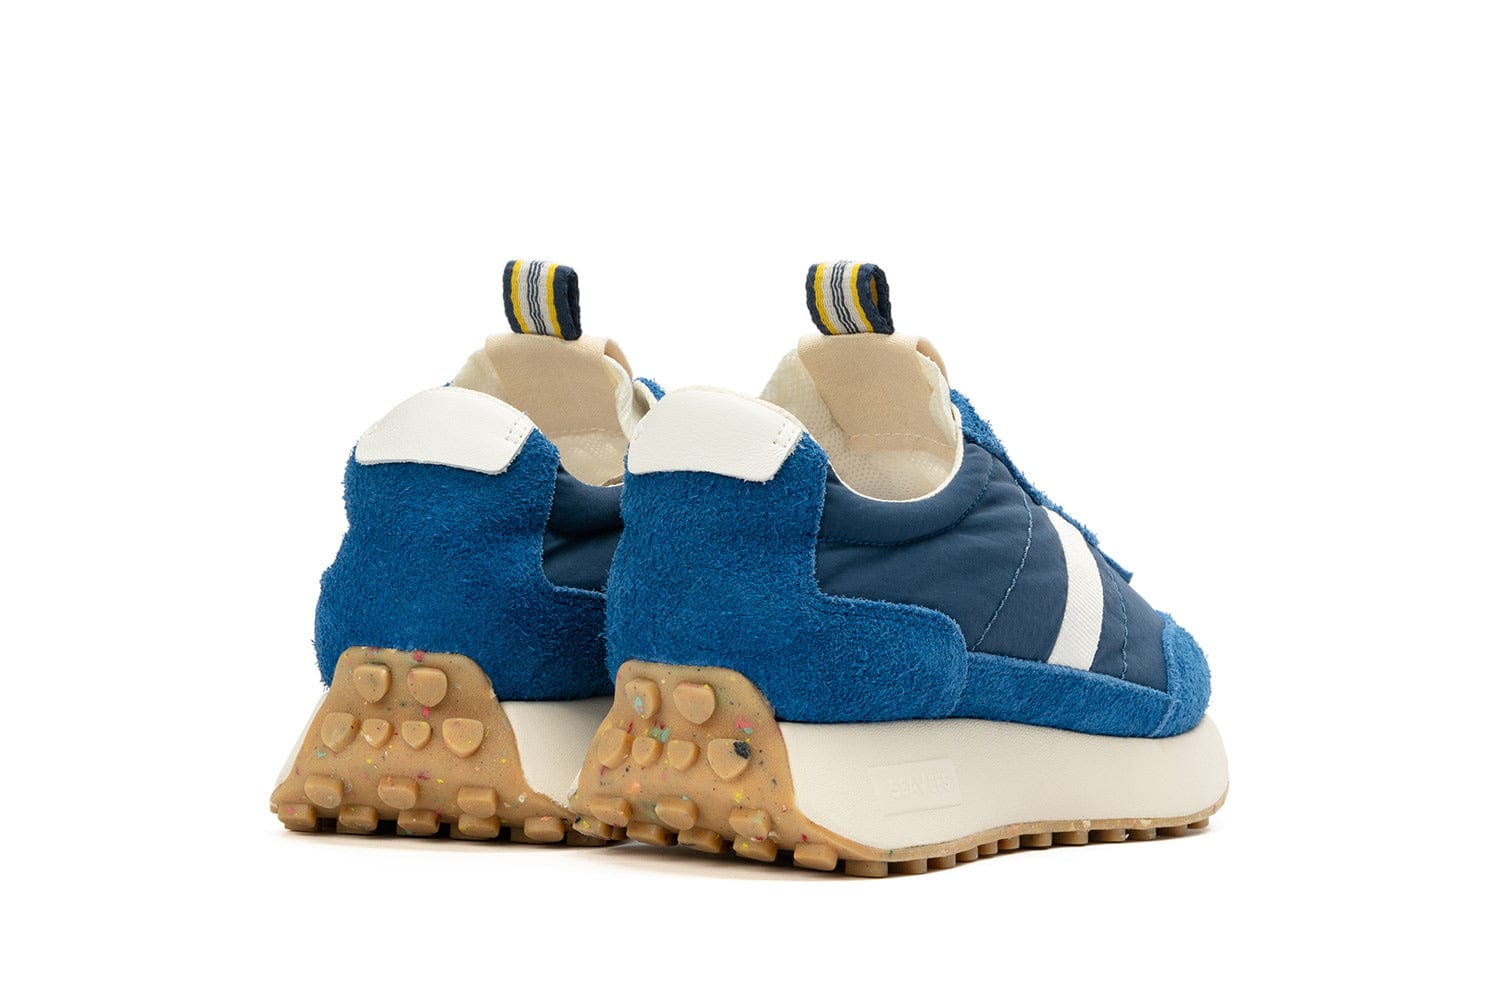 A rear-angled view of the Acorn sneaker in Varsity Blue, showcasing the pull tab and colorful sole.